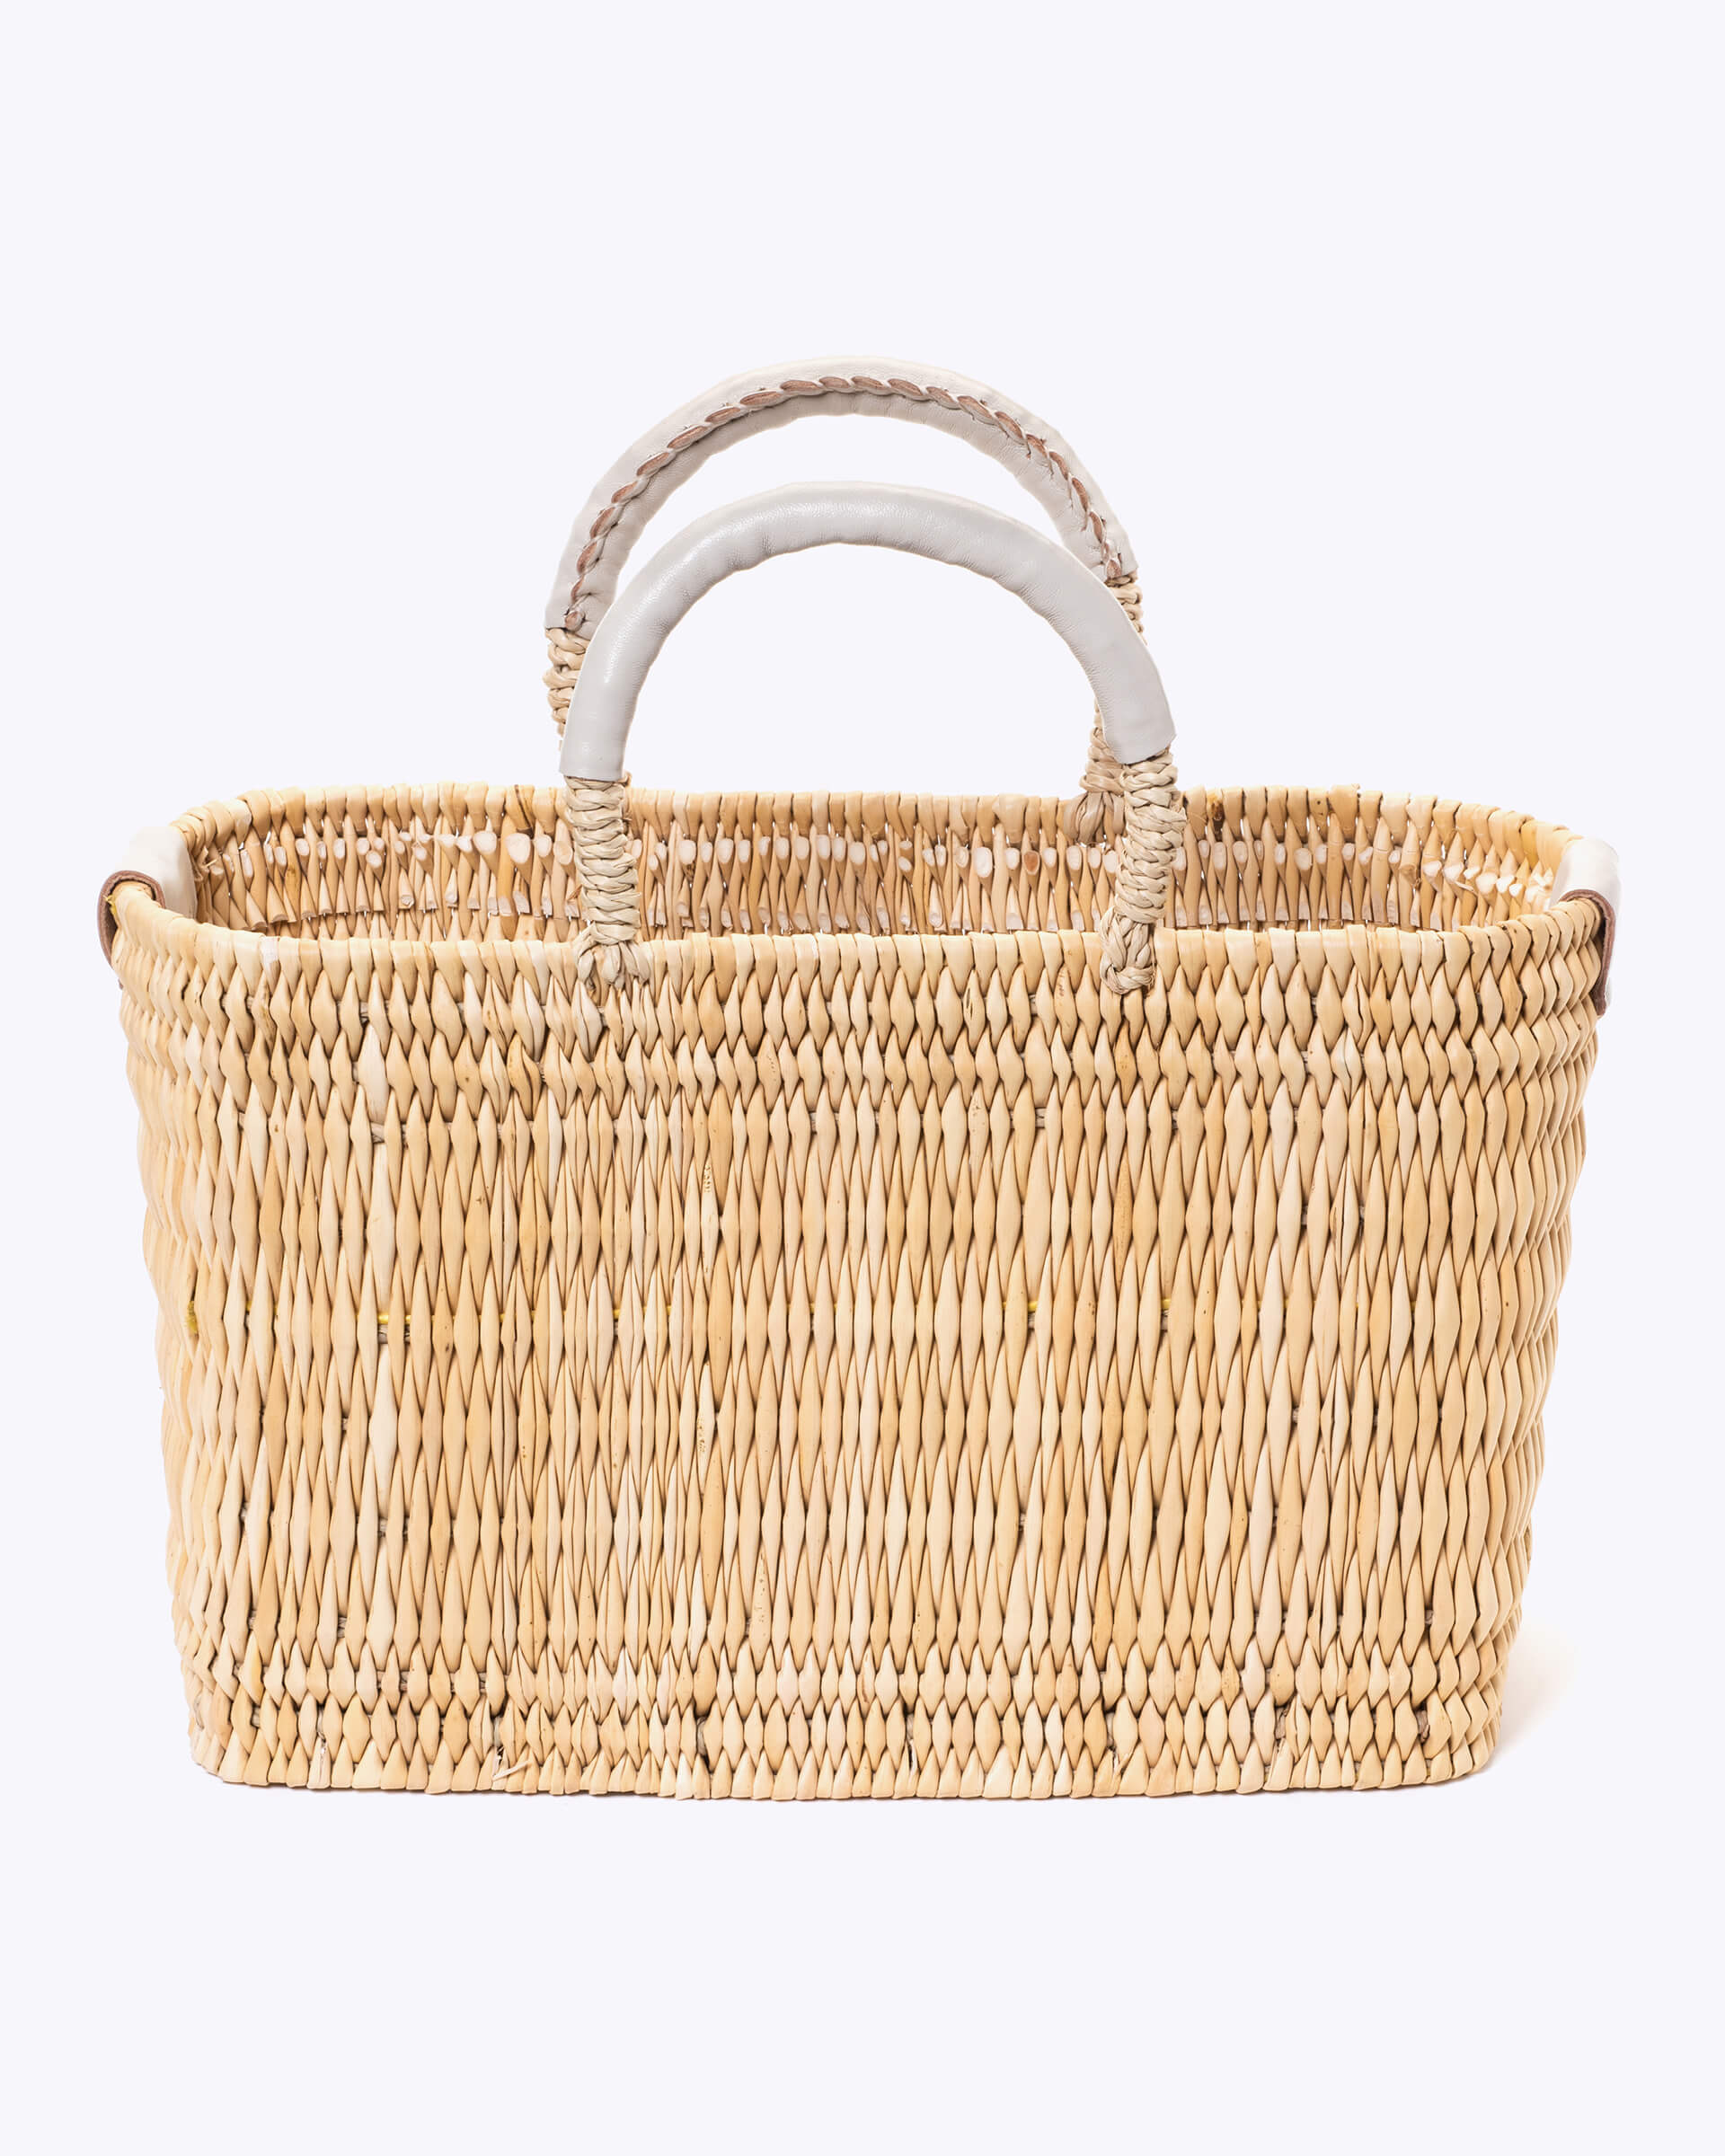 Woven Straw Tote Basket Colorful Wicker Market Basket Small 